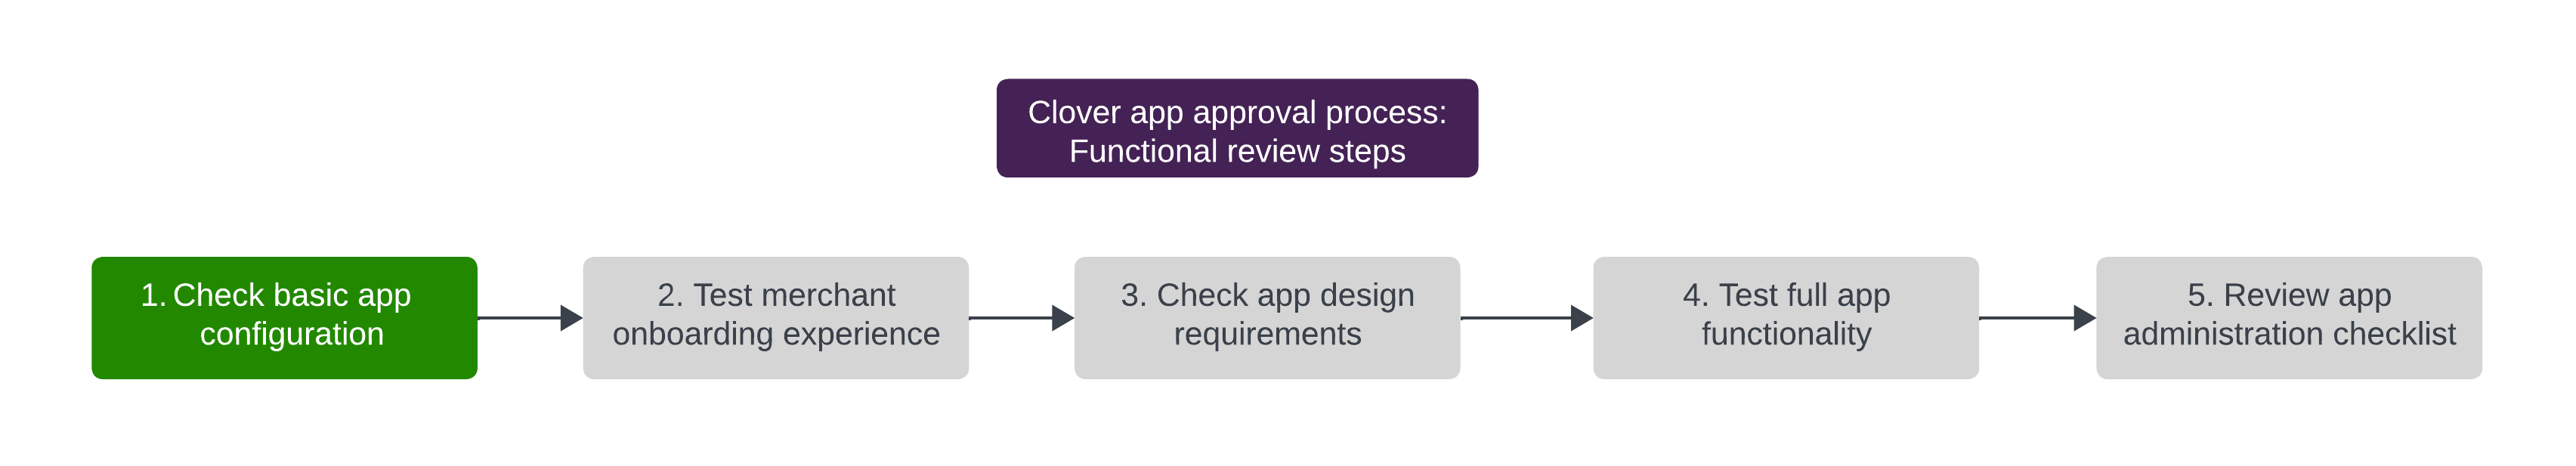 Functional review: Basic app configuration